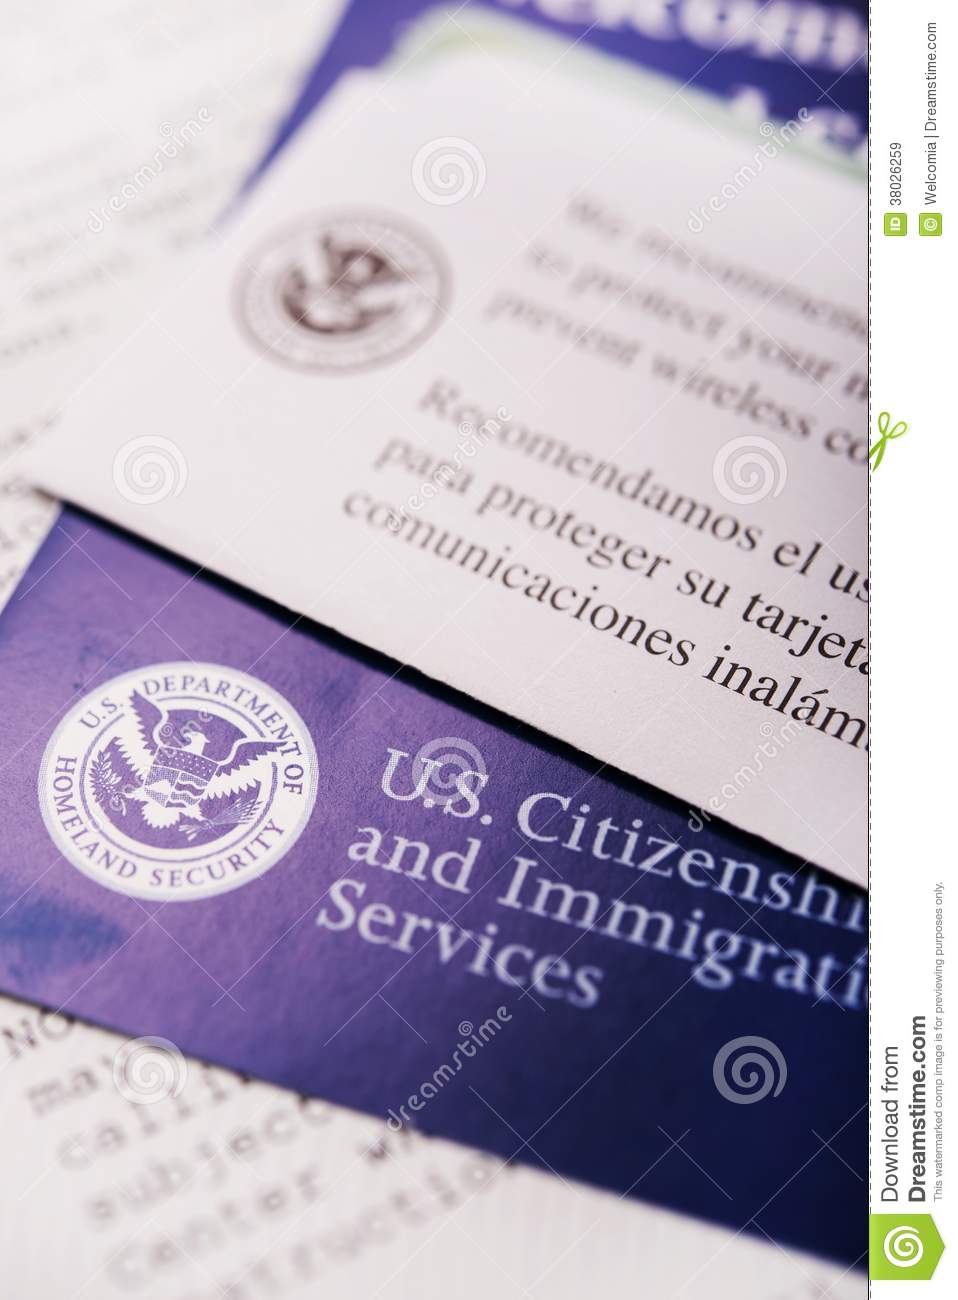 United States Citizenship And Immigration Flyers And Documents Closeup